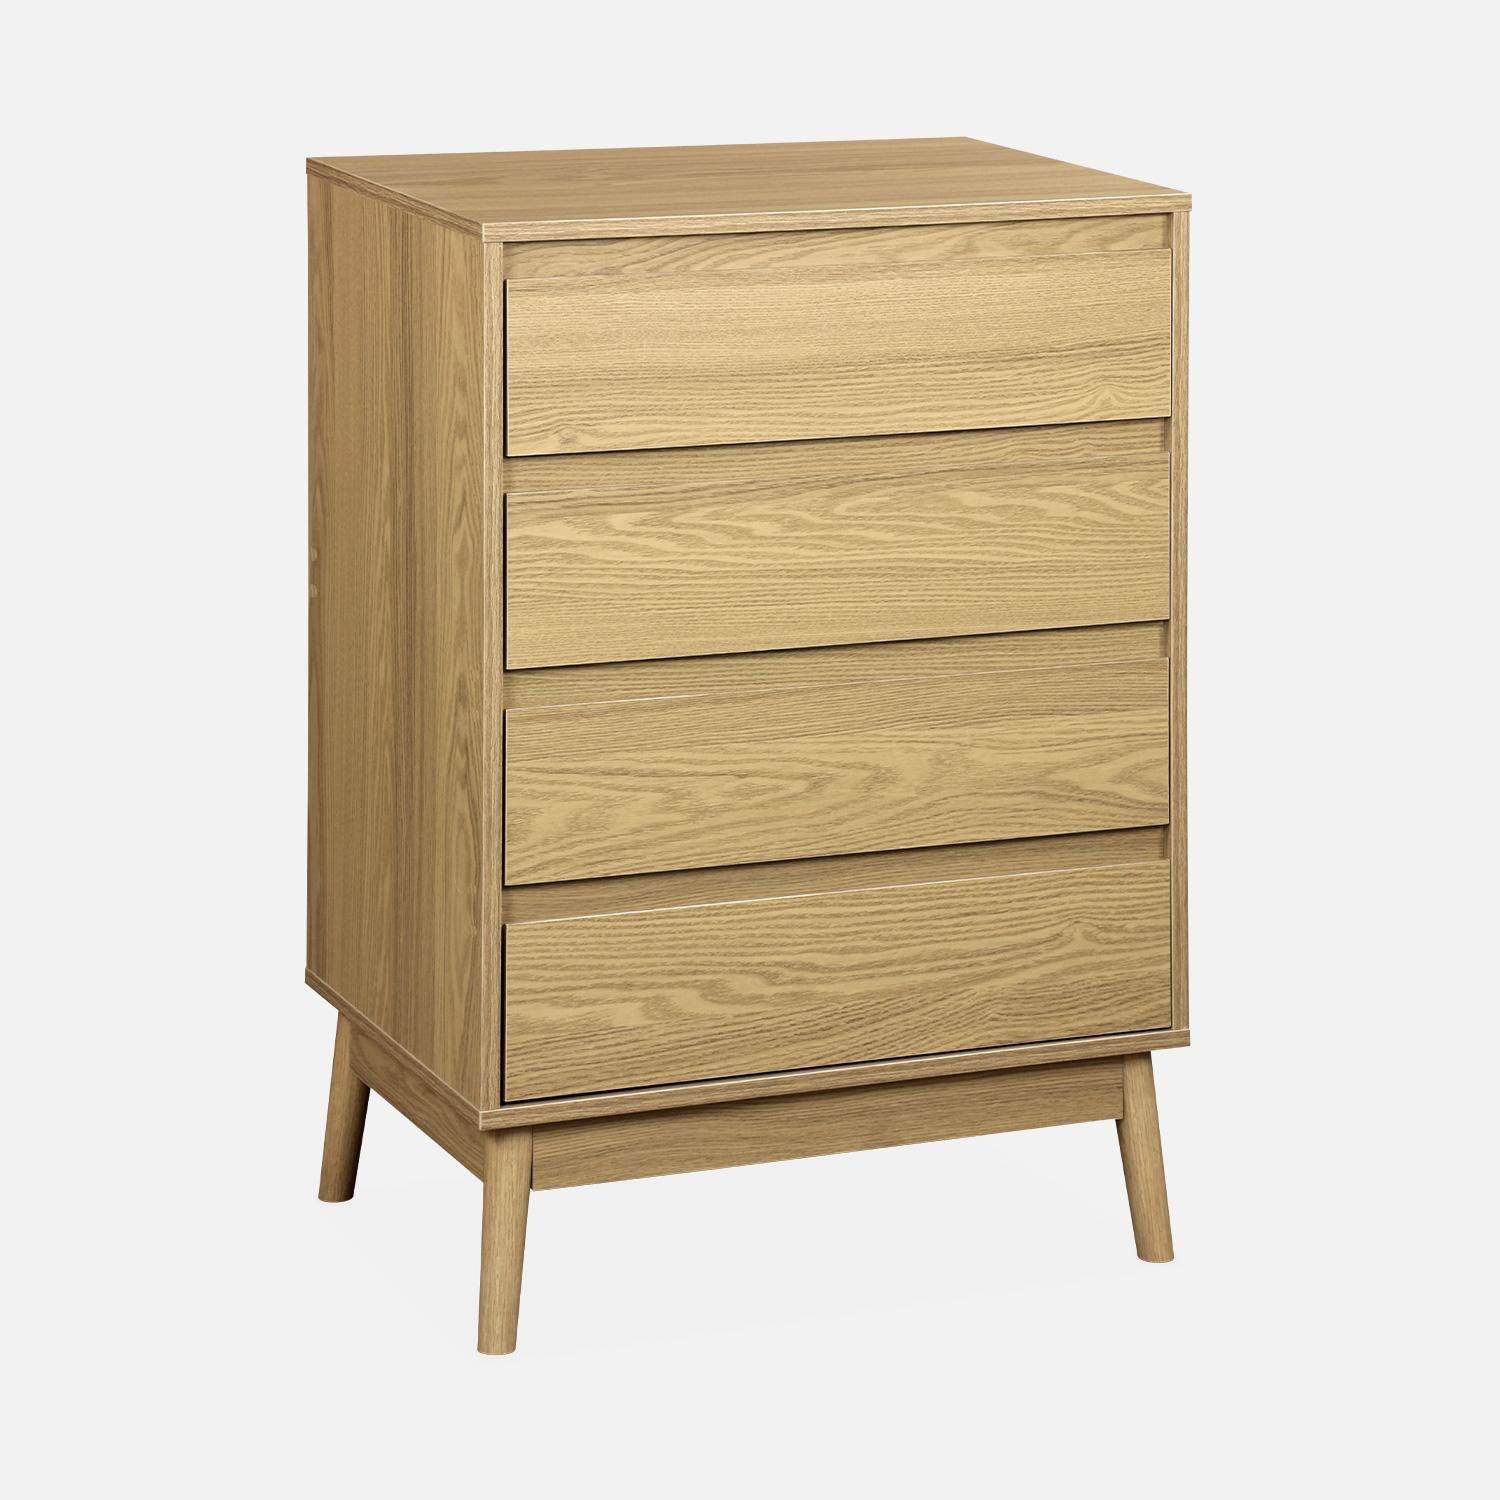 Wooden 4-drawer chest, 60x40x91cm - Dune - Natural wood colour,sweeek,Photo3